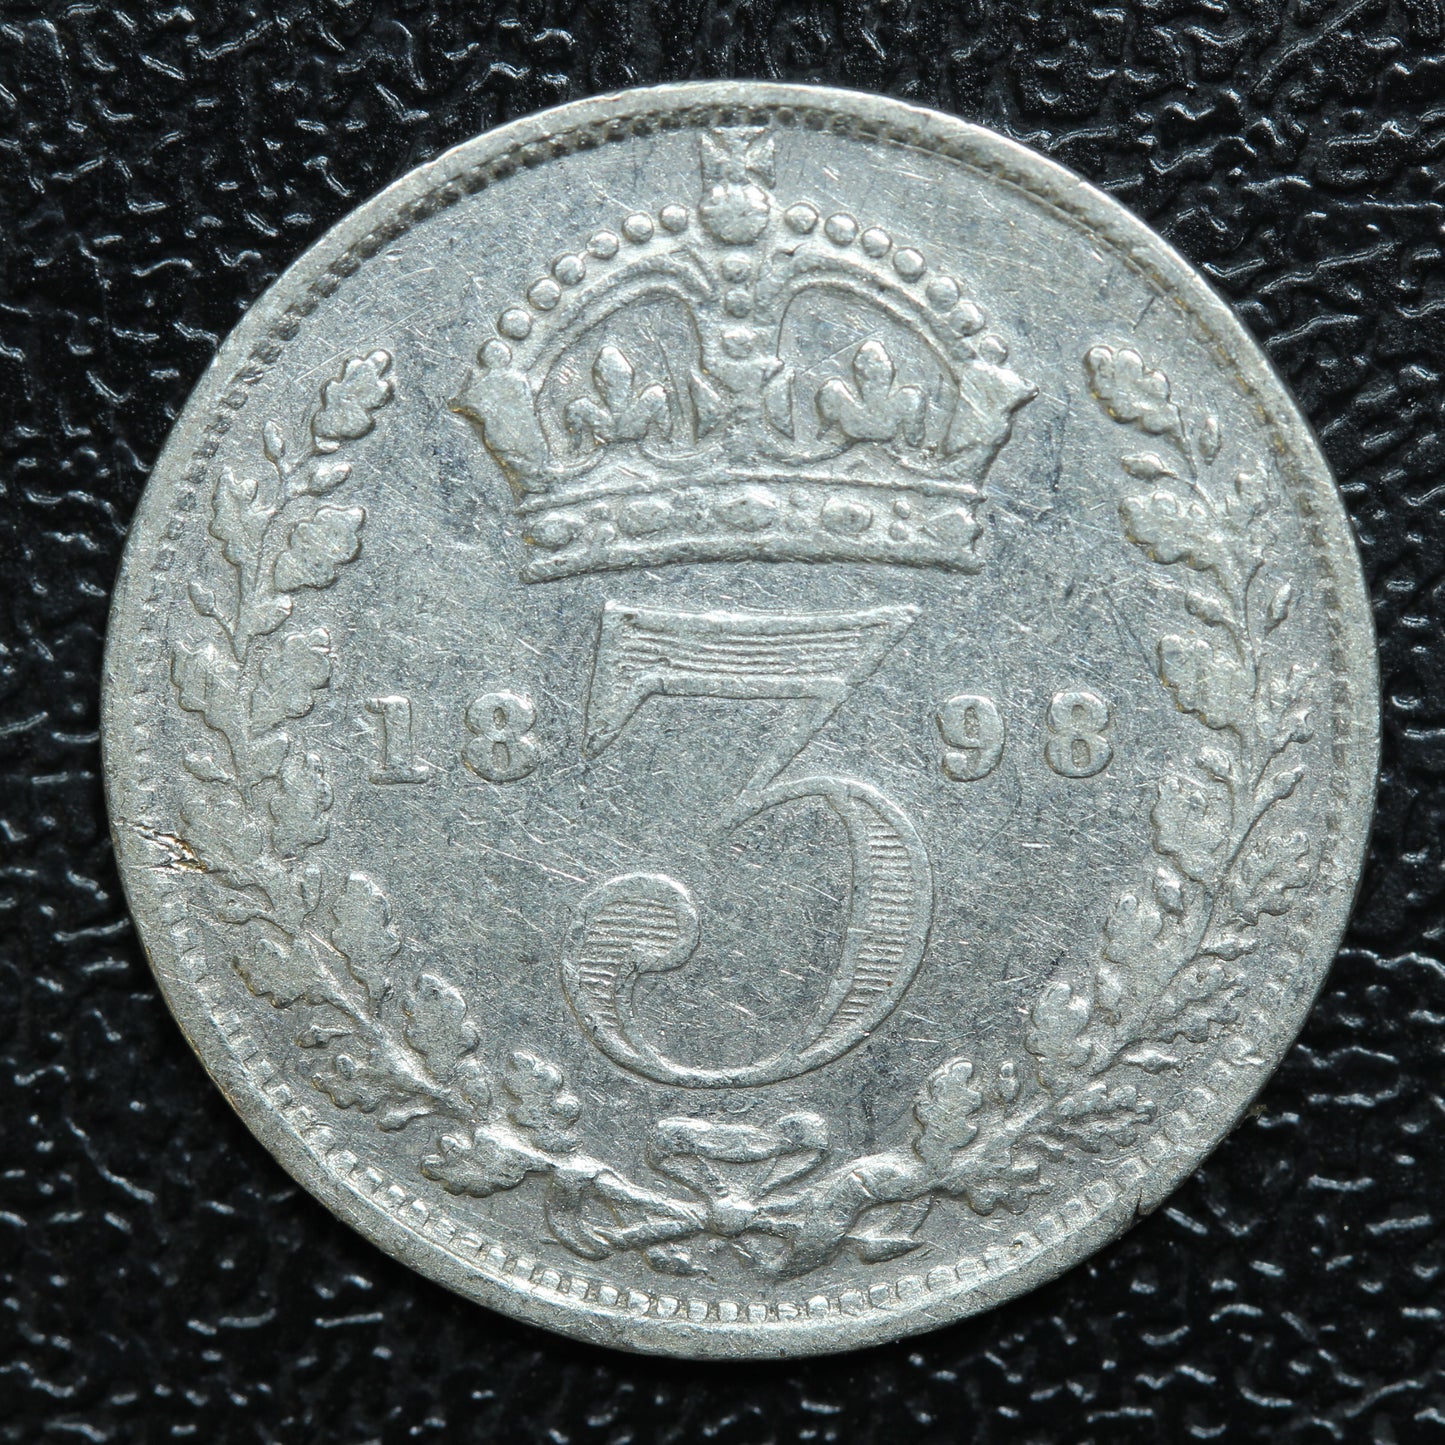 1898 Great Britain 3 Pence Threepence Silver Coin - KM# 777